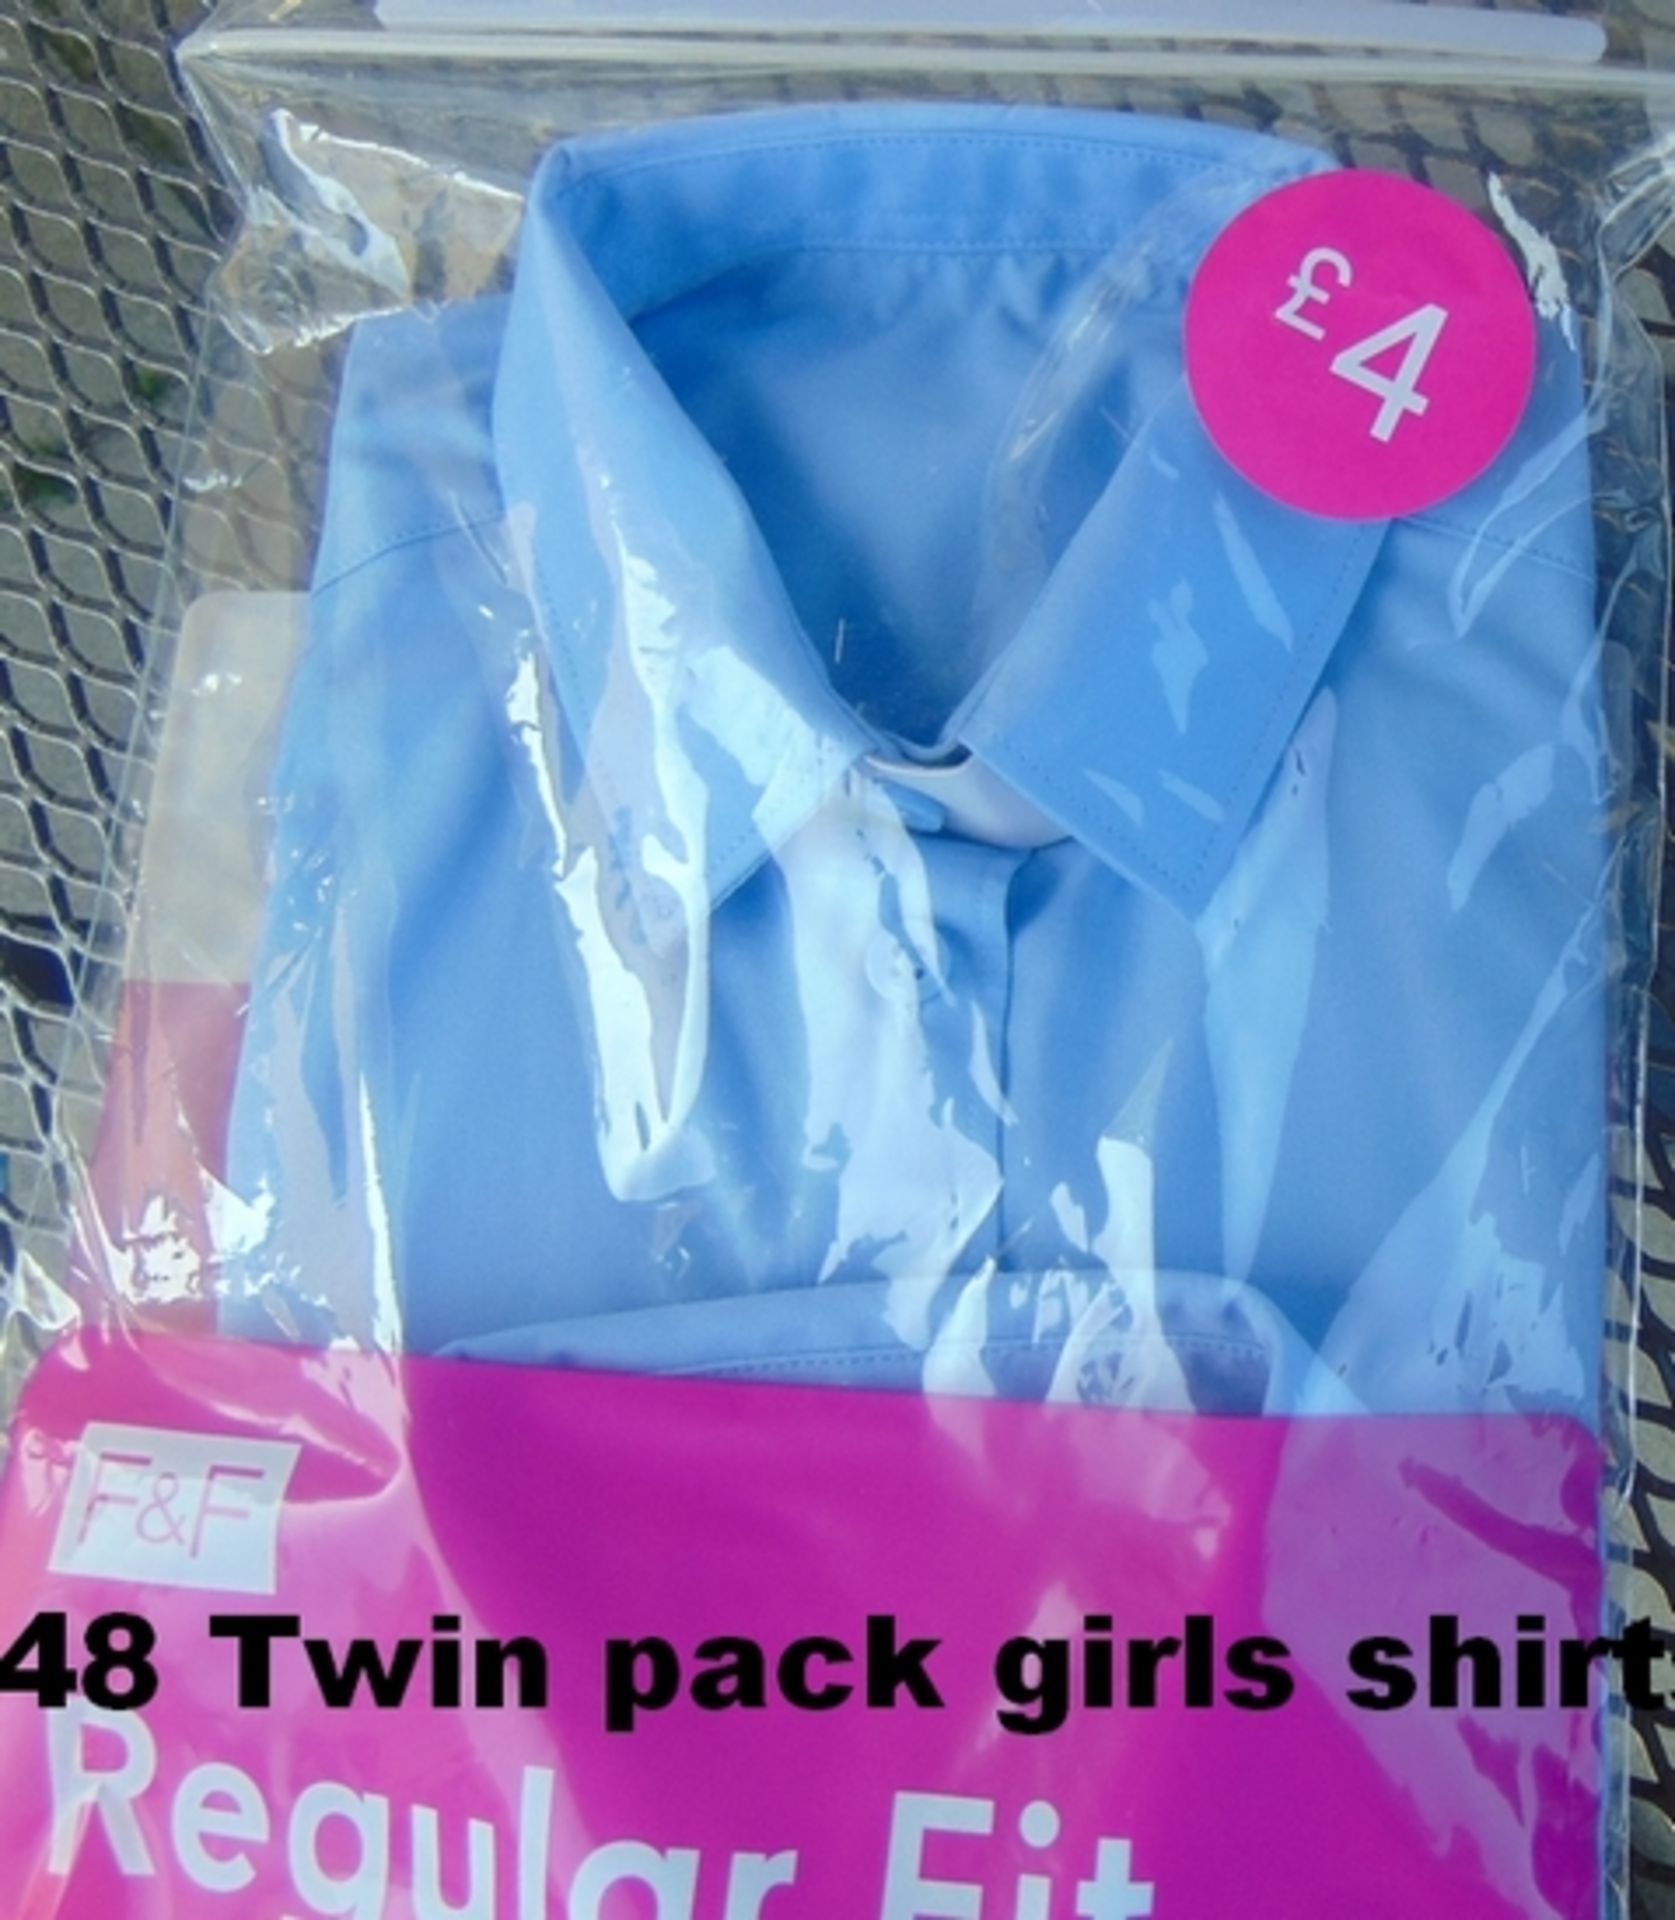 48 mixed girls and boys twin packs of shirts sizes from 5 to 13. - Bild 3 aus 3